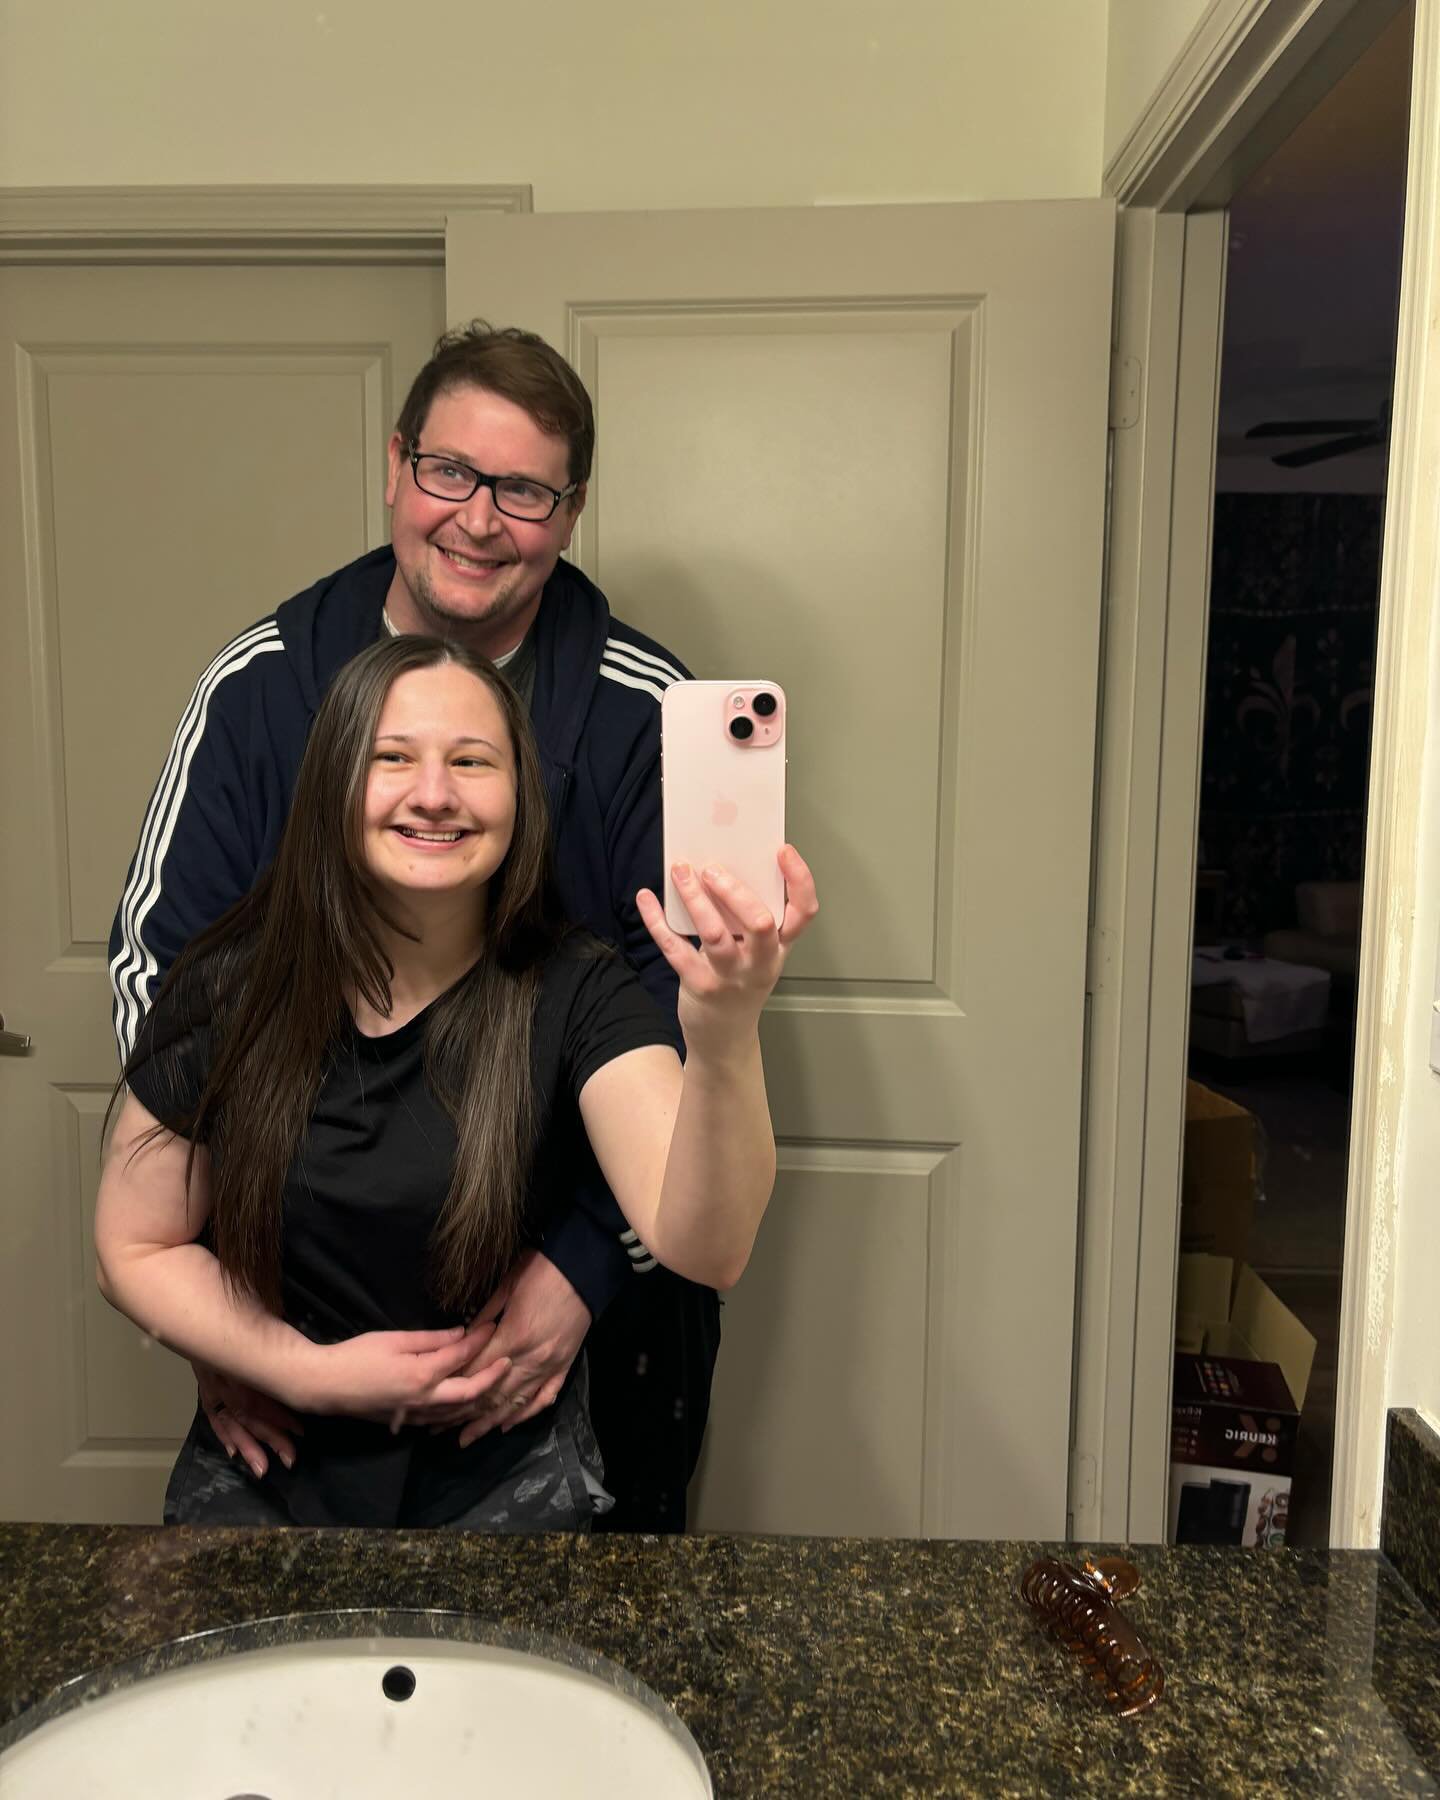 Gypsy Rose Blanchard and her husband Ryan Scott Anderson pictured on Instagram